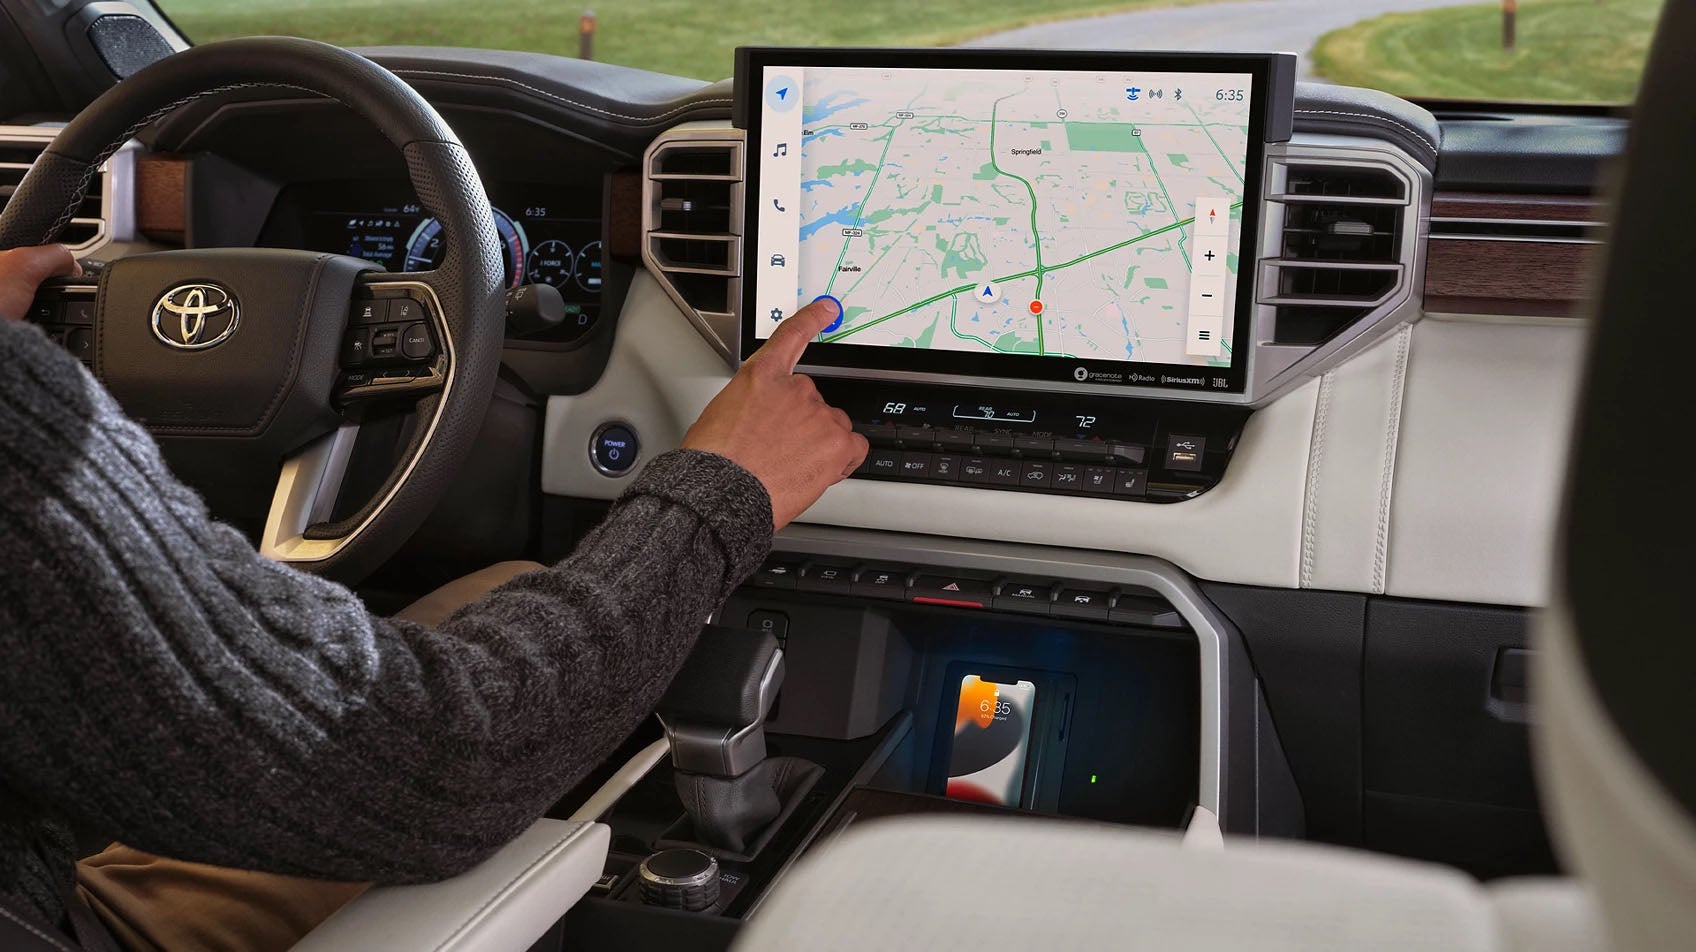 Sequoia high-tech features include this large 14 inch touchscreen display